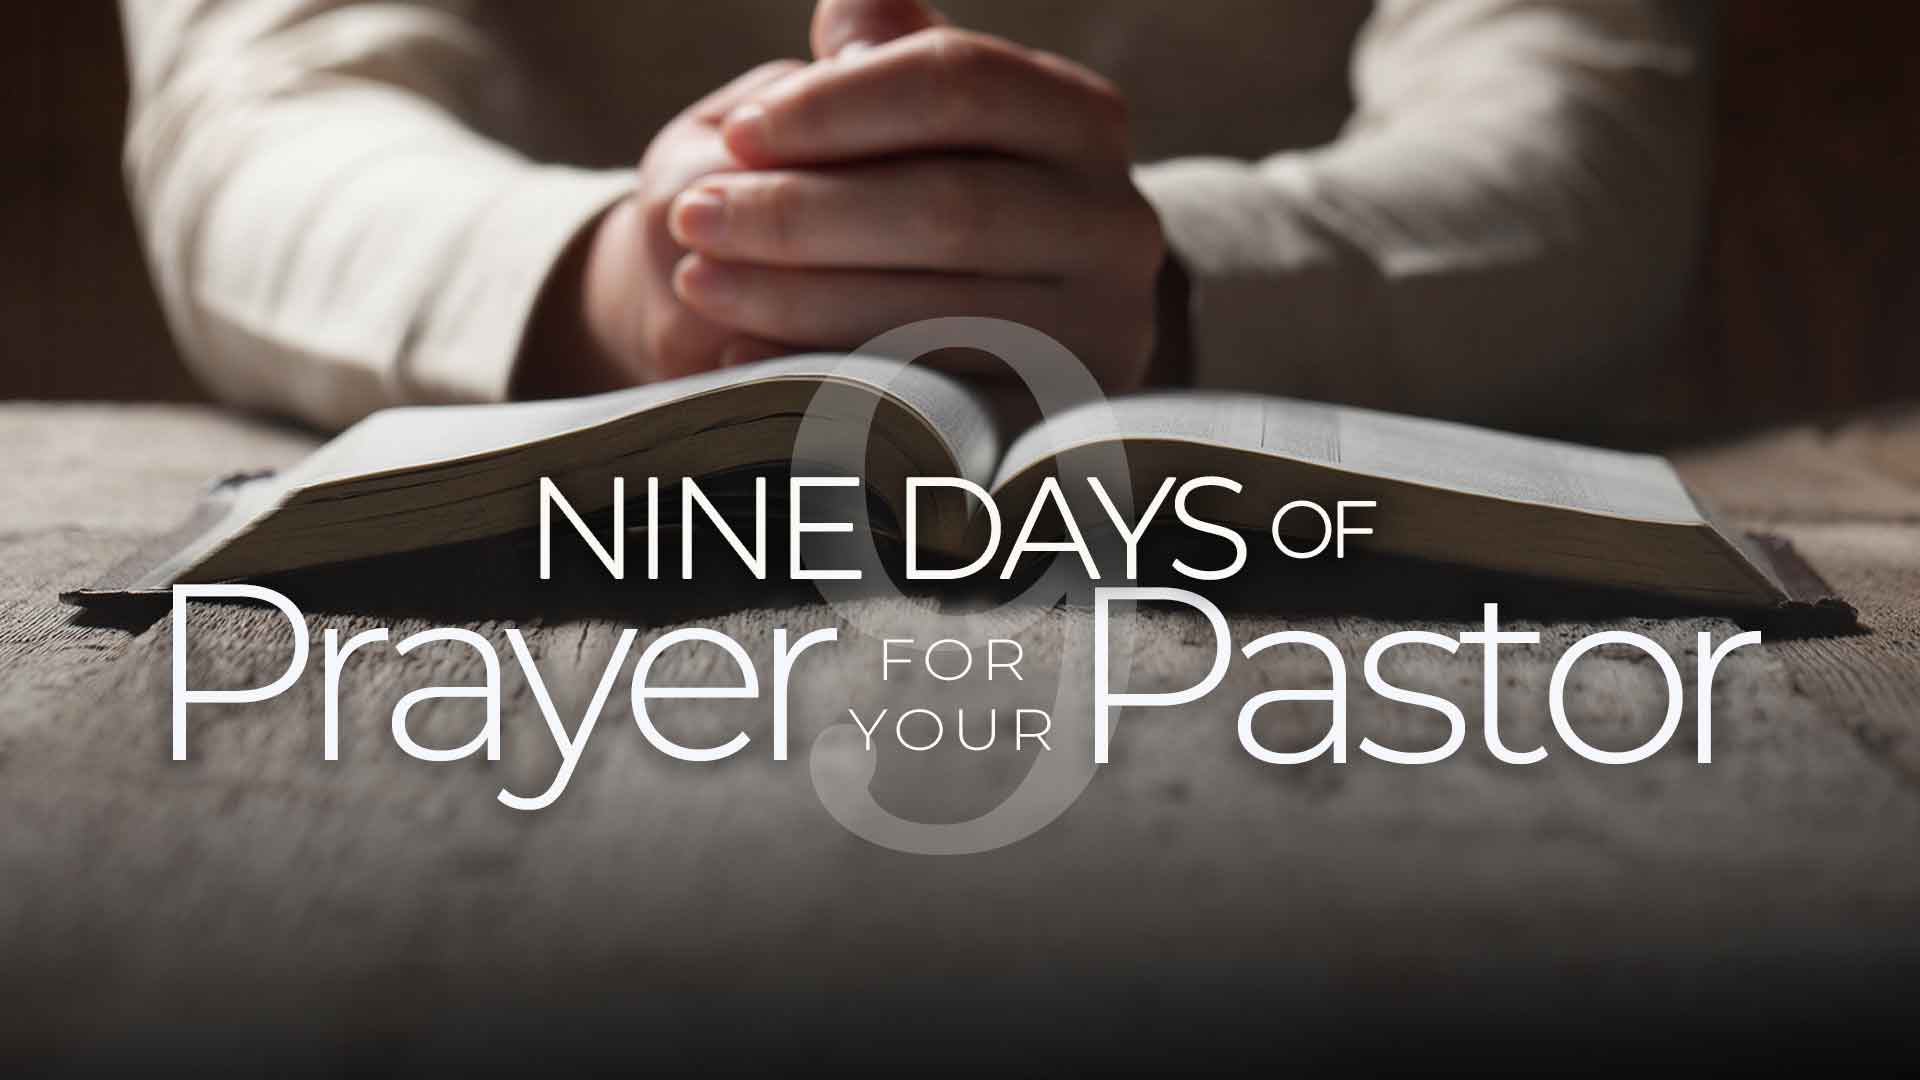 9 DAYS OF PRAYER FOR YOUR PASTOR